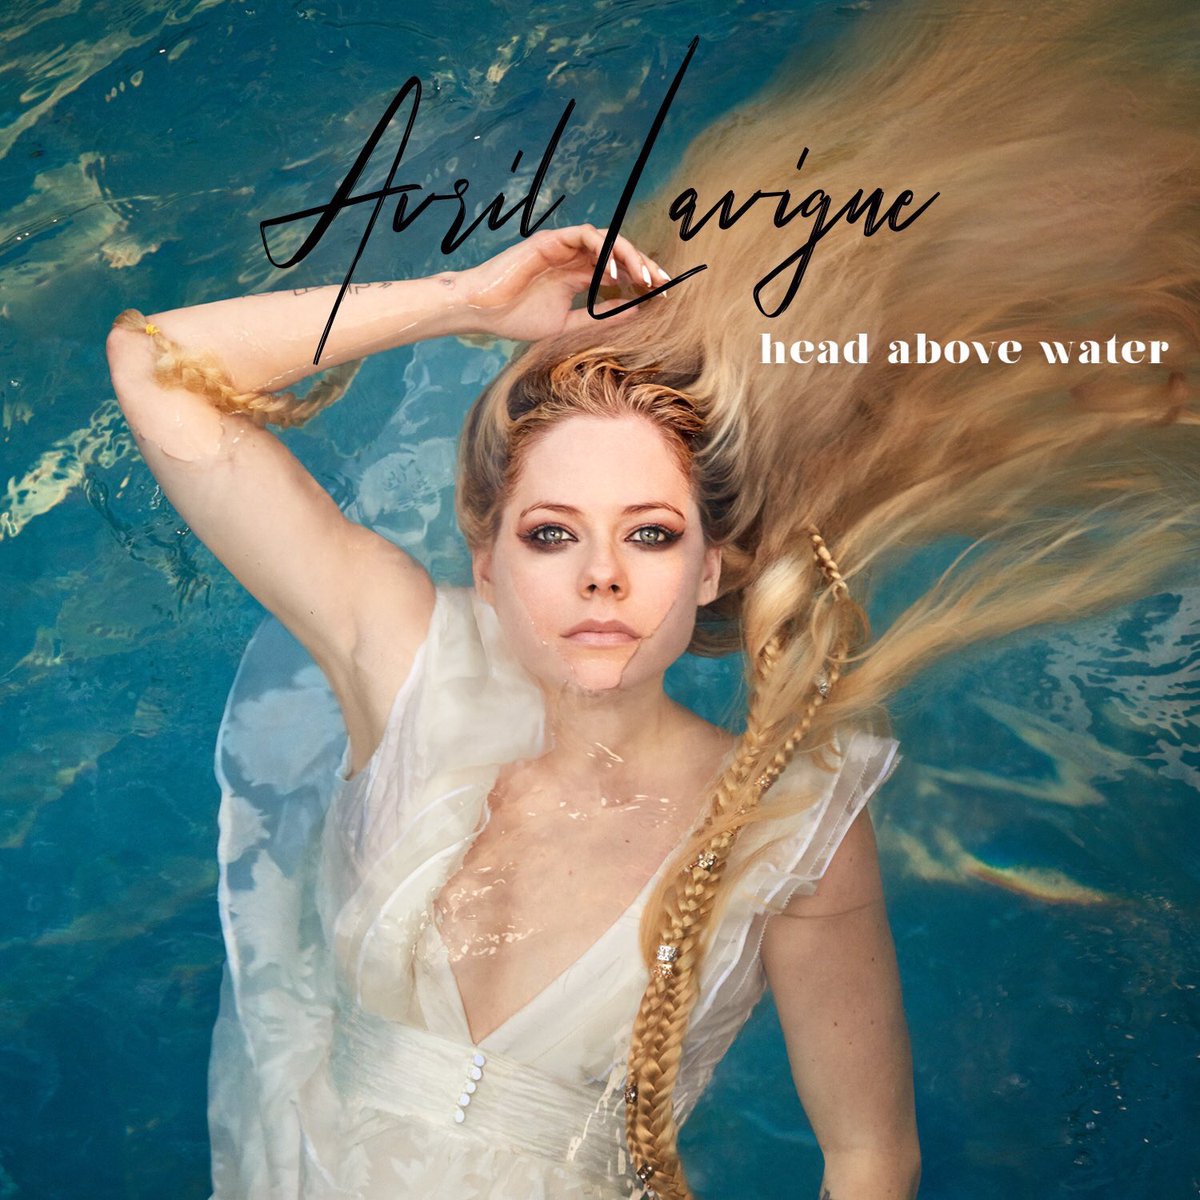 RT @PopCrave: “Head Above Water” by @AvrilLavigne spends a fourth day at #1 on the Worldwide iTunes Song Chart. https://t.co/08l2kbjcga